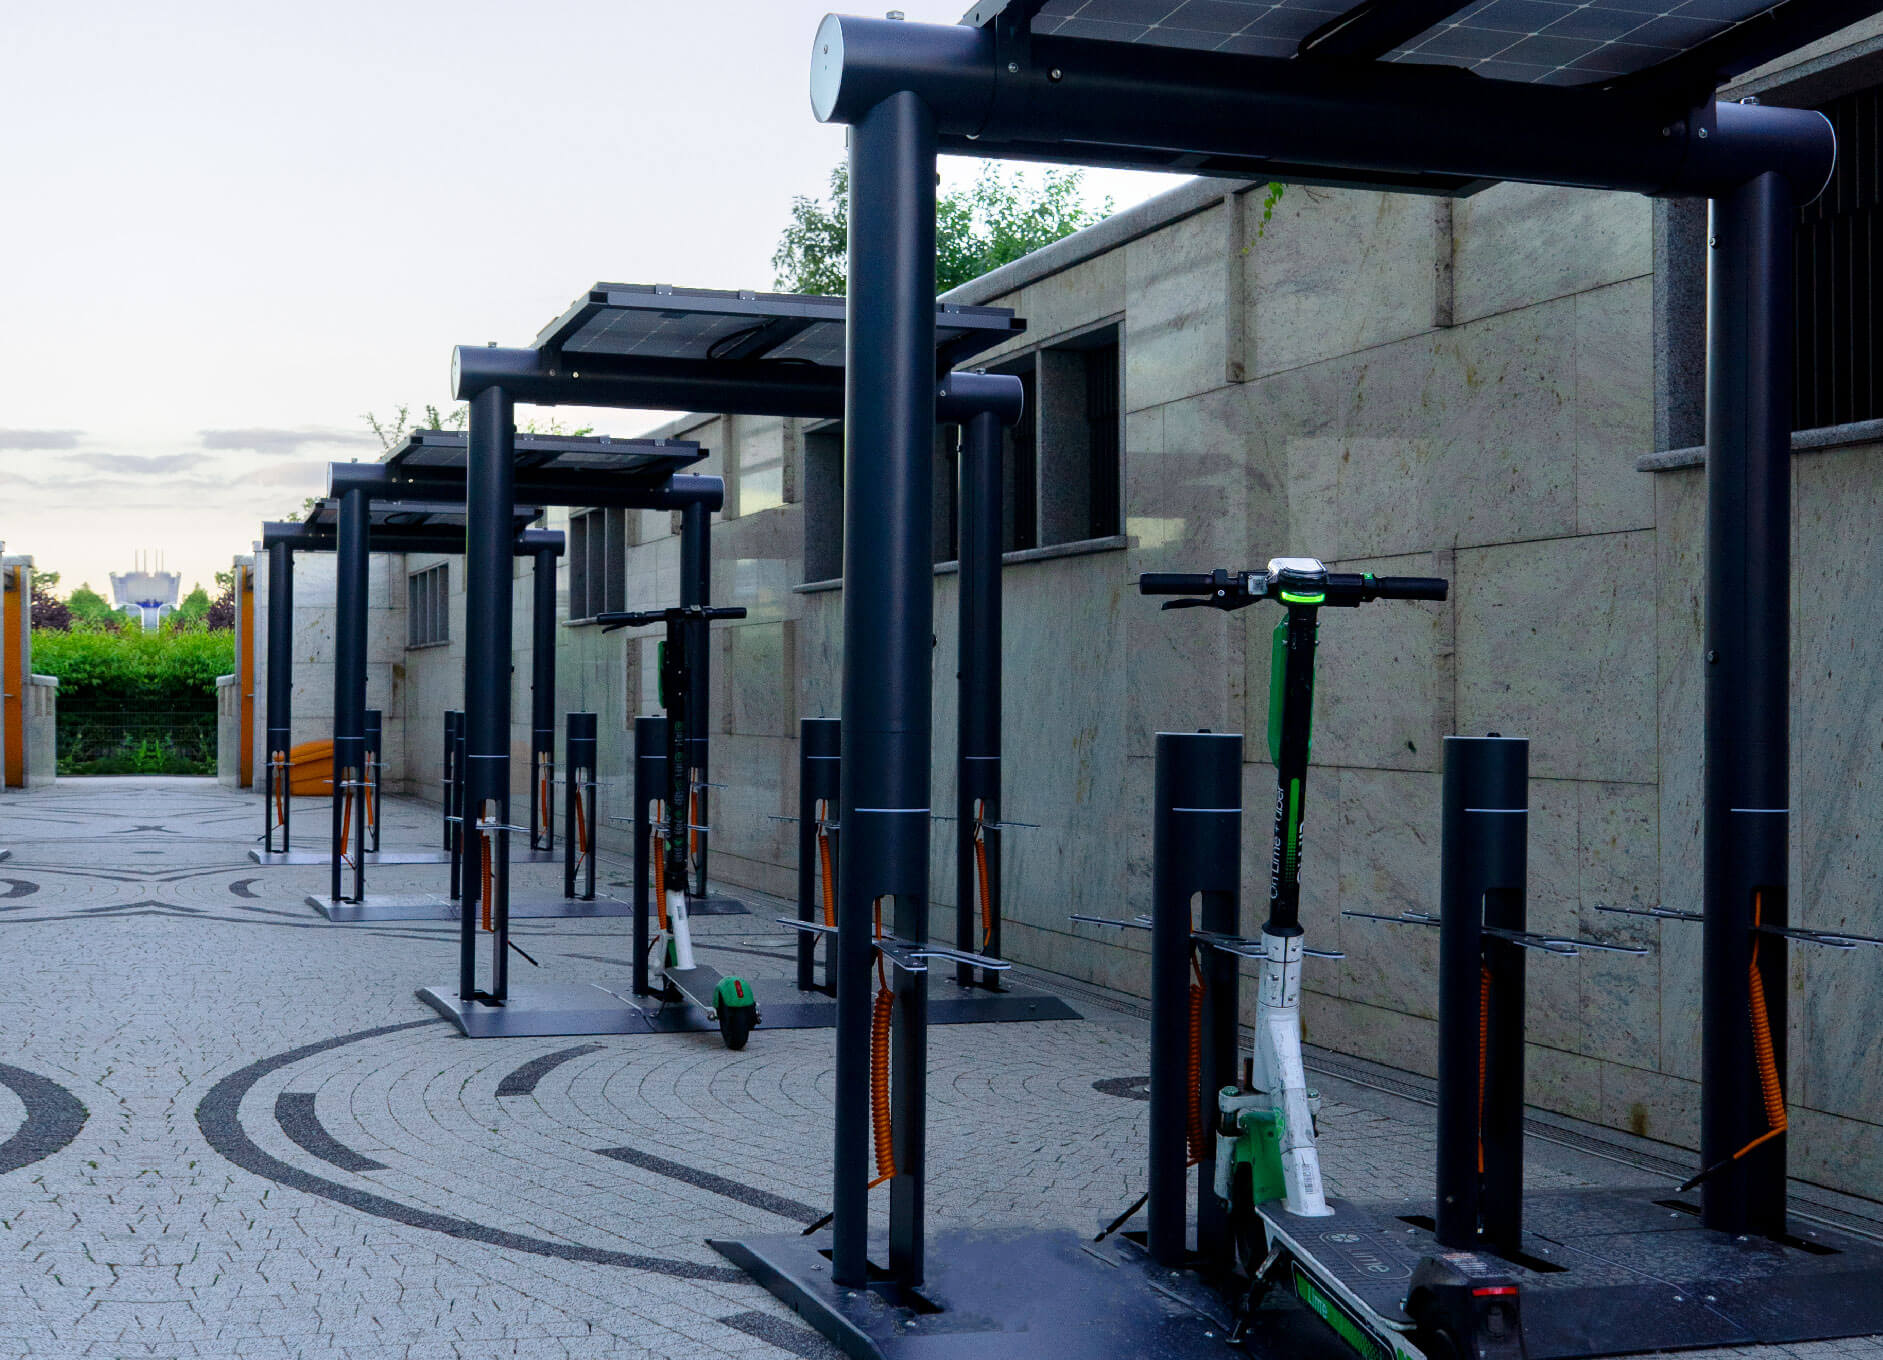 Four solar scooter charging stations